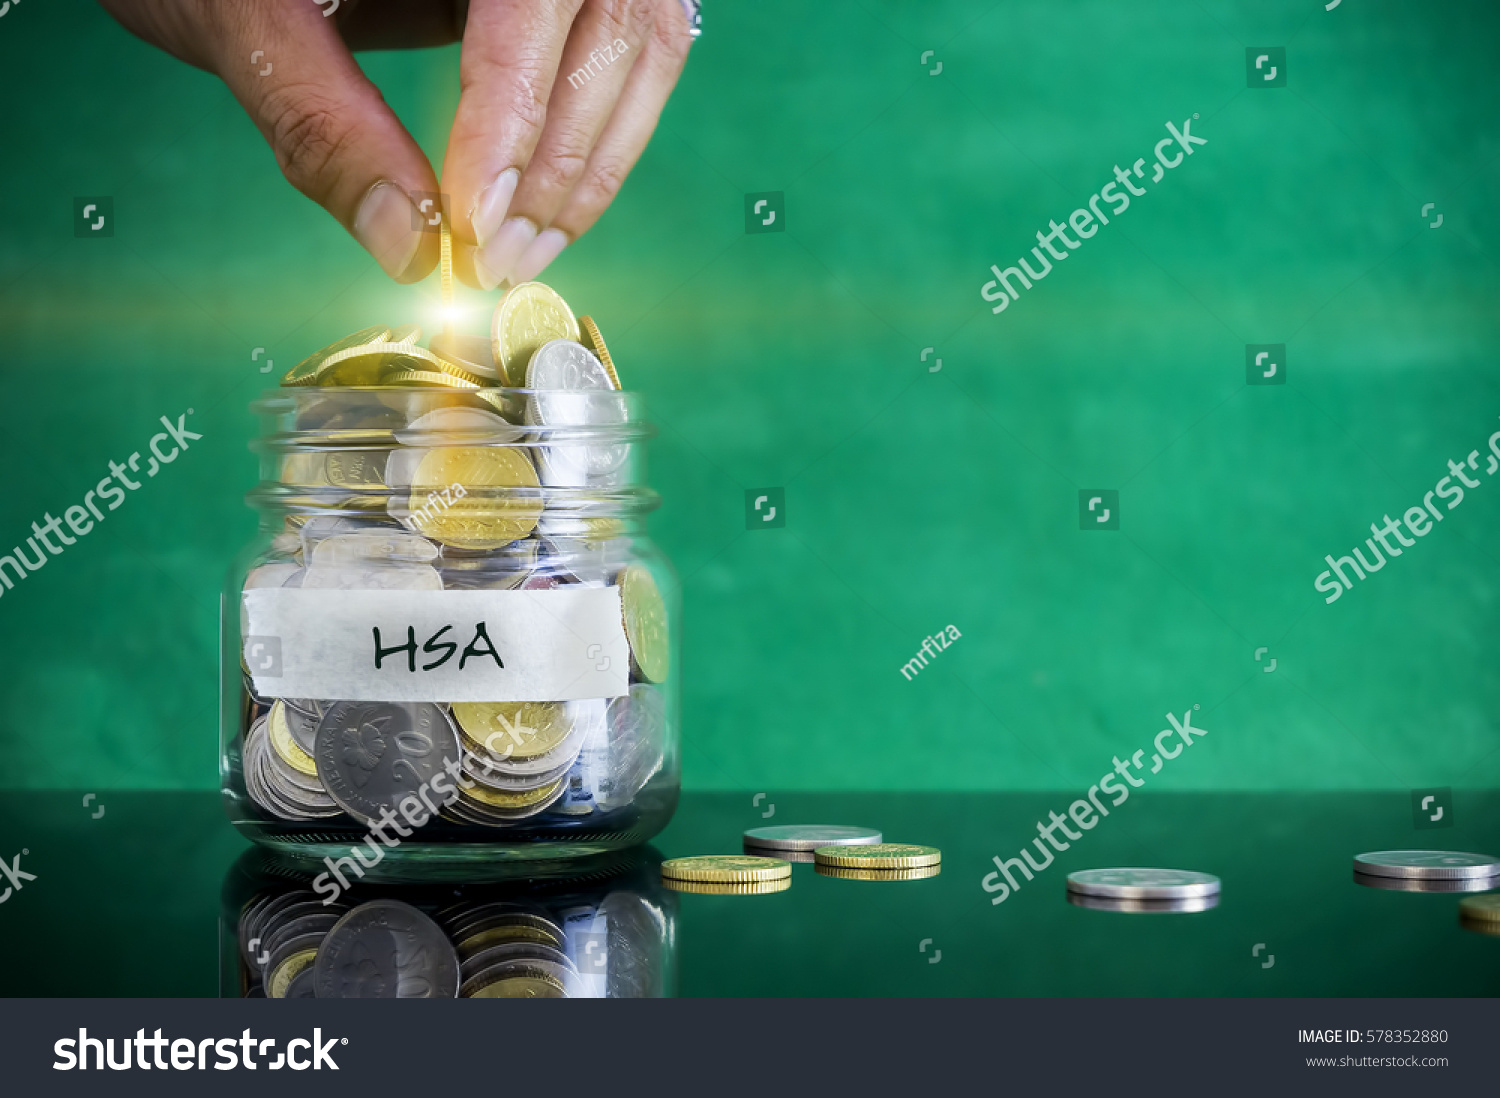 Preparation for future and financial concept. Coins in glass jar with HSA (Health Saving Account) label with light flare. Malaysia coins. #578352880